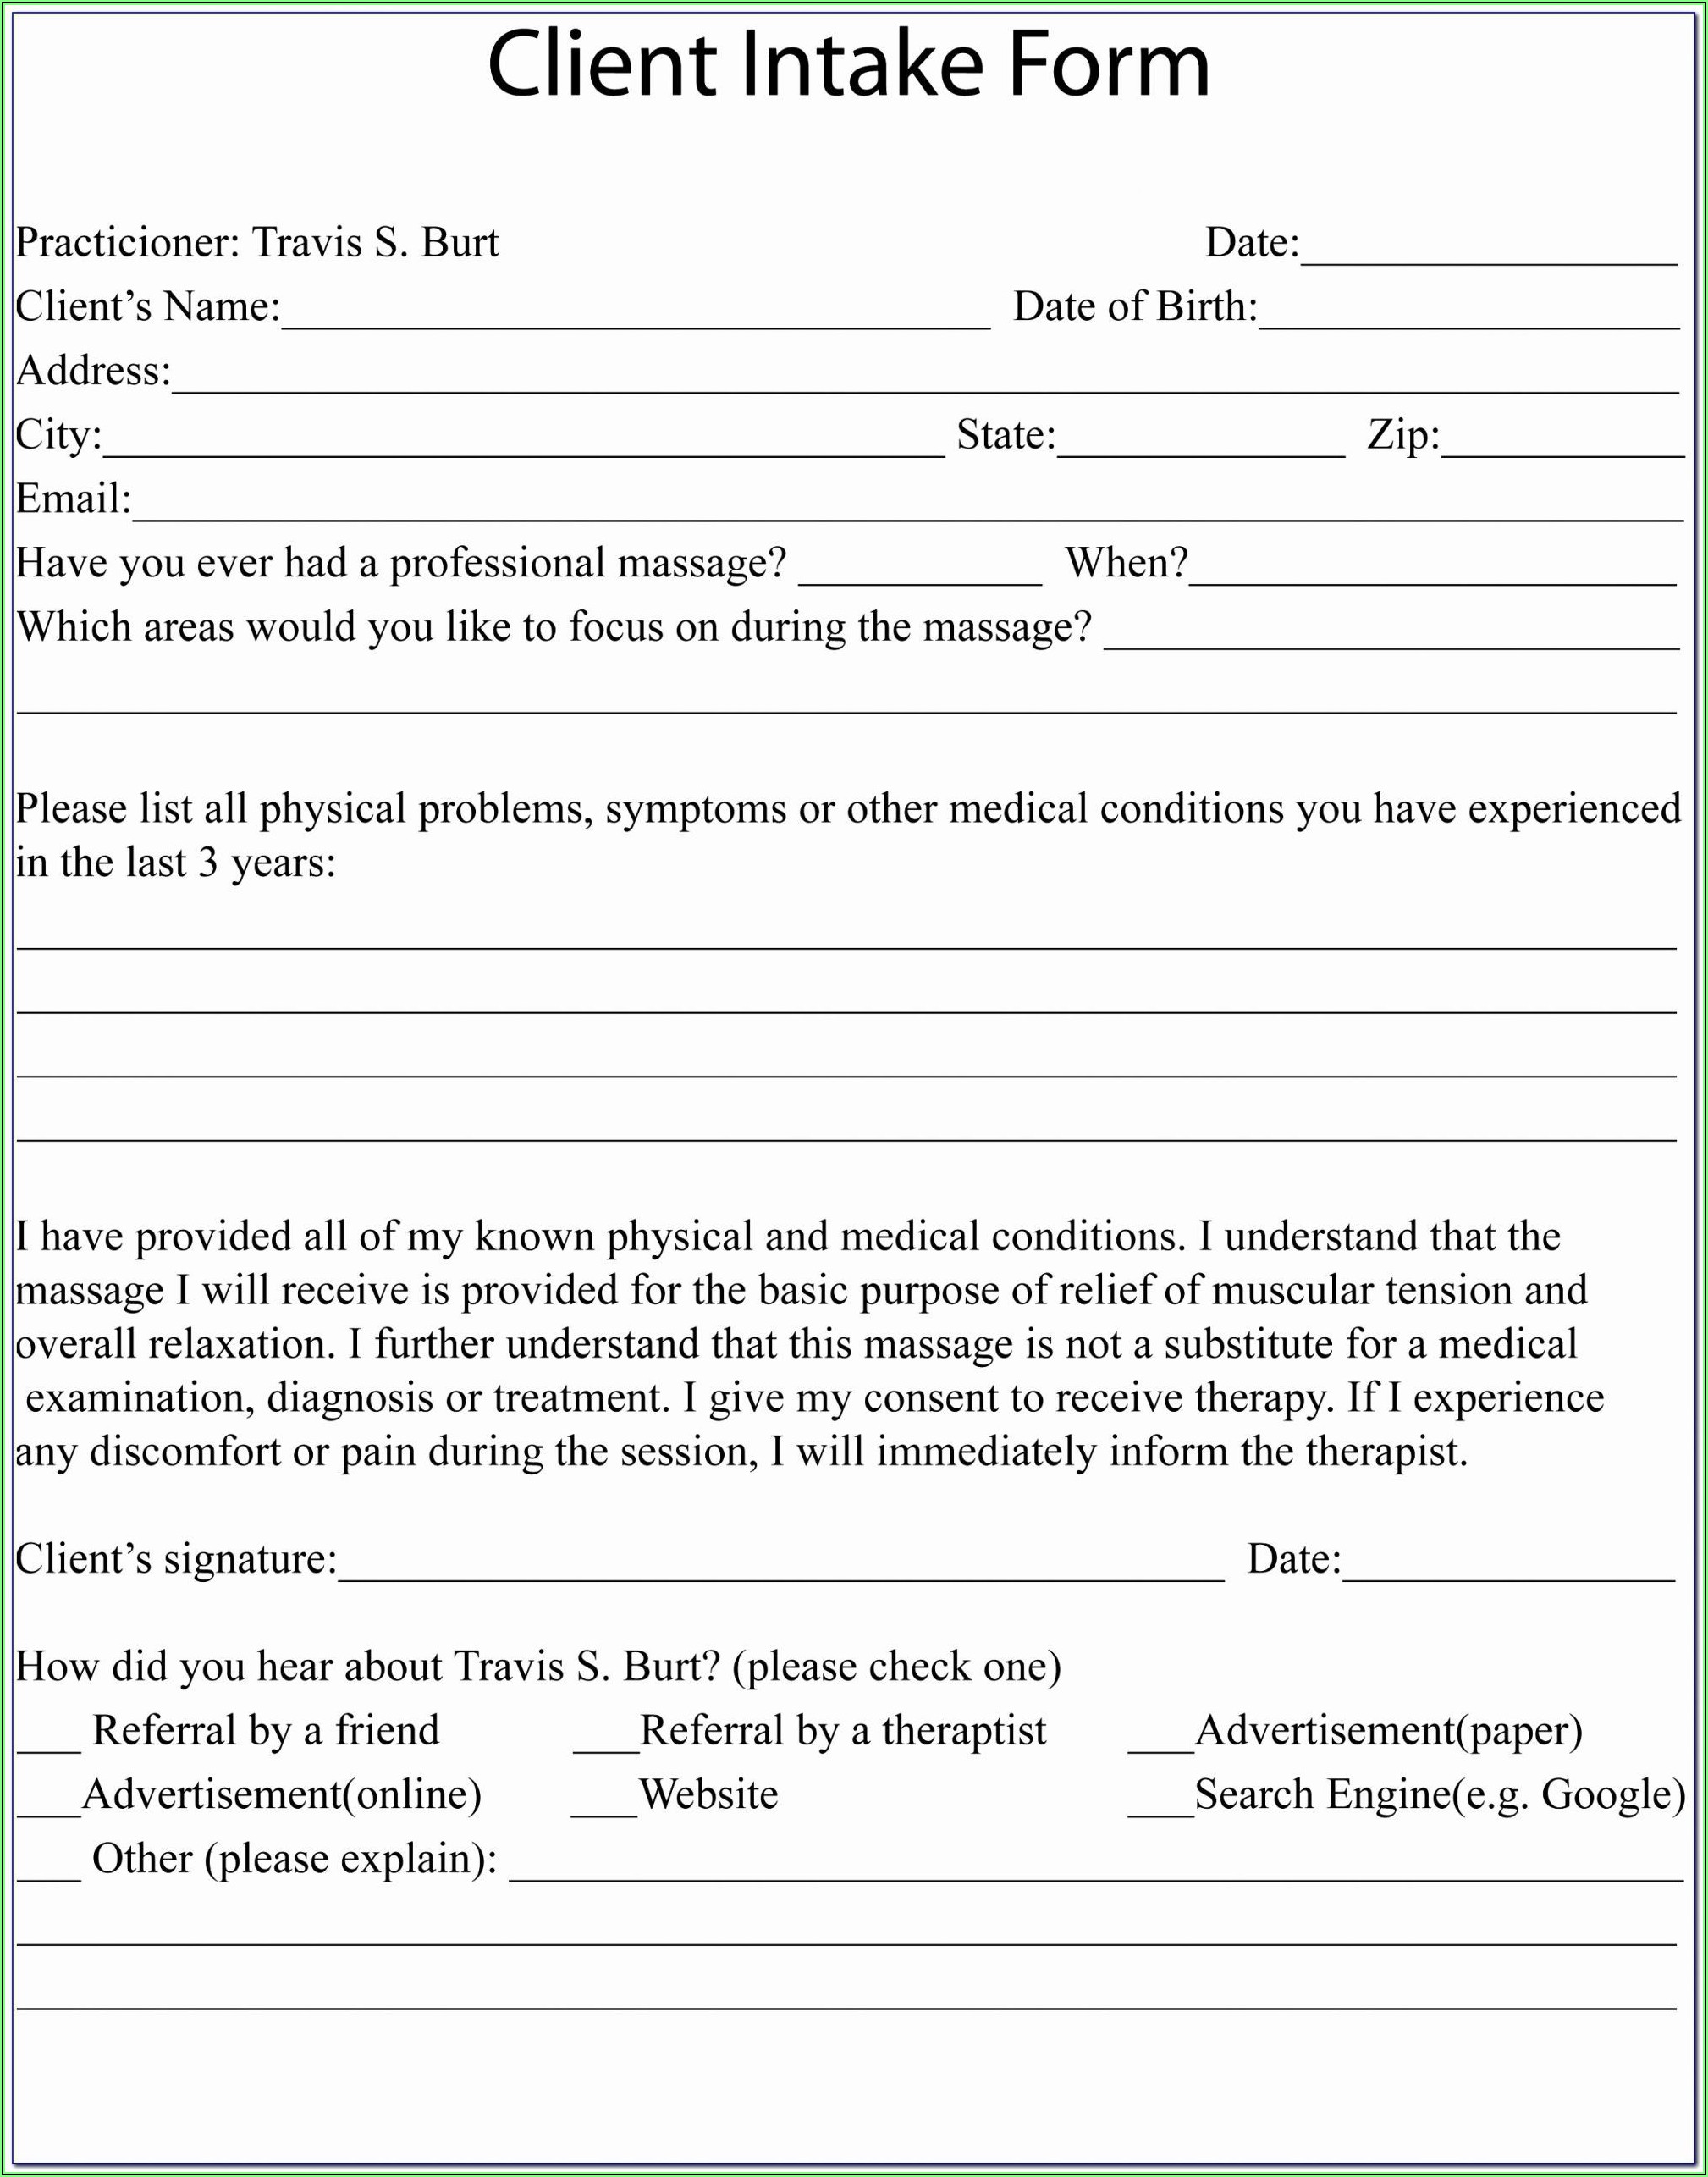 Client Intake Form Psychotherapy